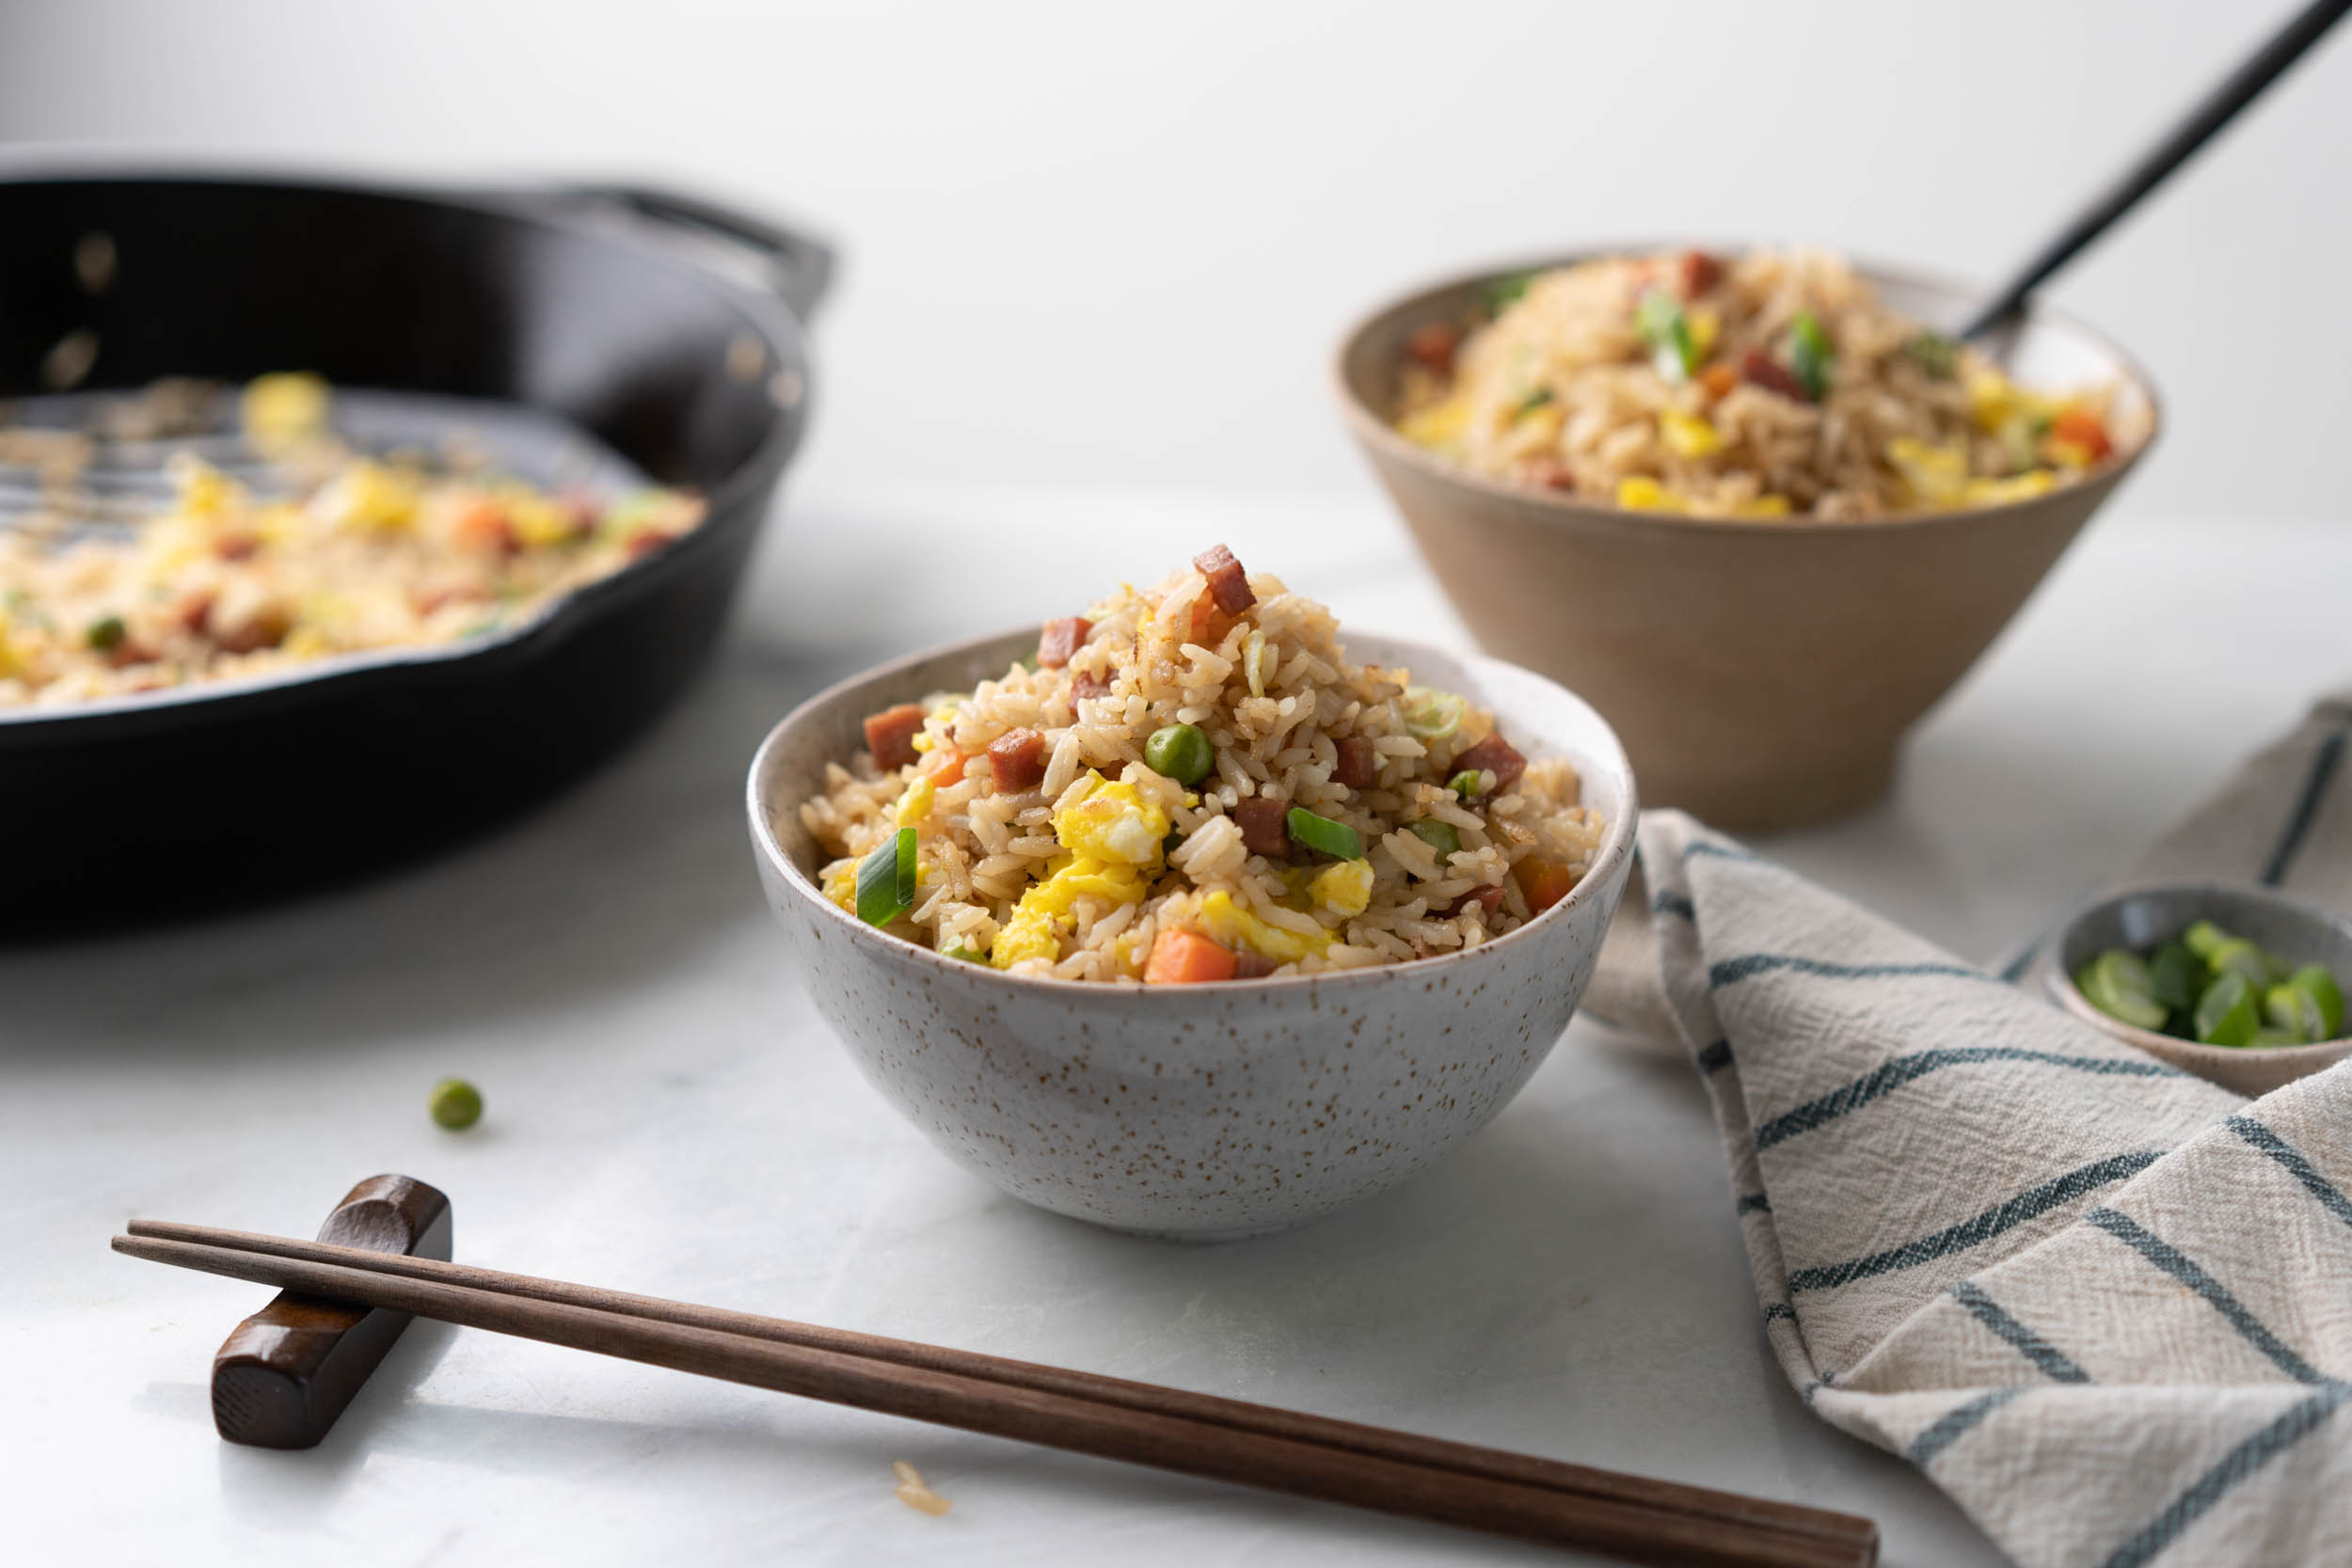 Spam fried rice bowl